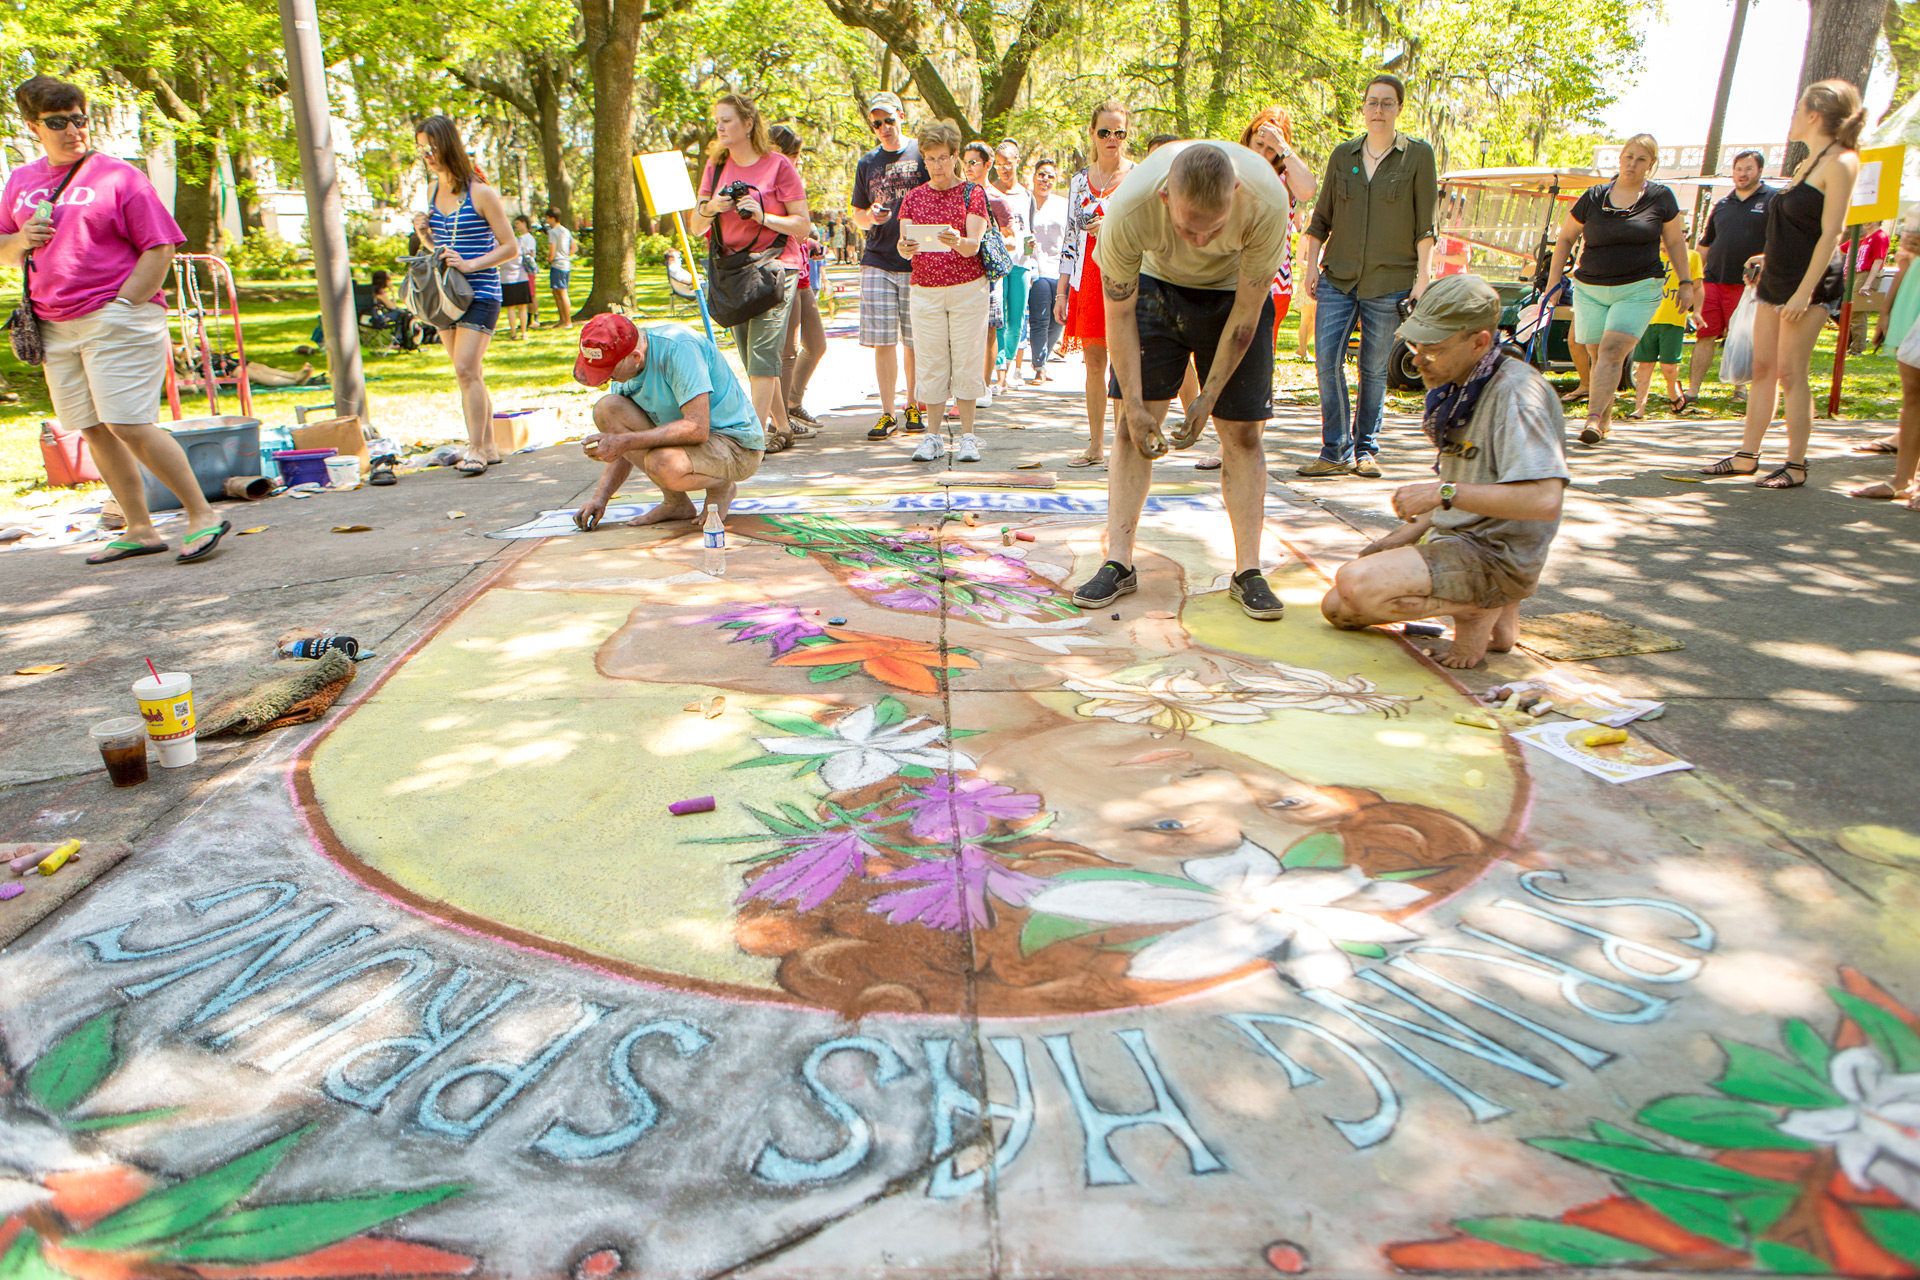 The 35th annual Sidewalk Arts Festival is just around the corner